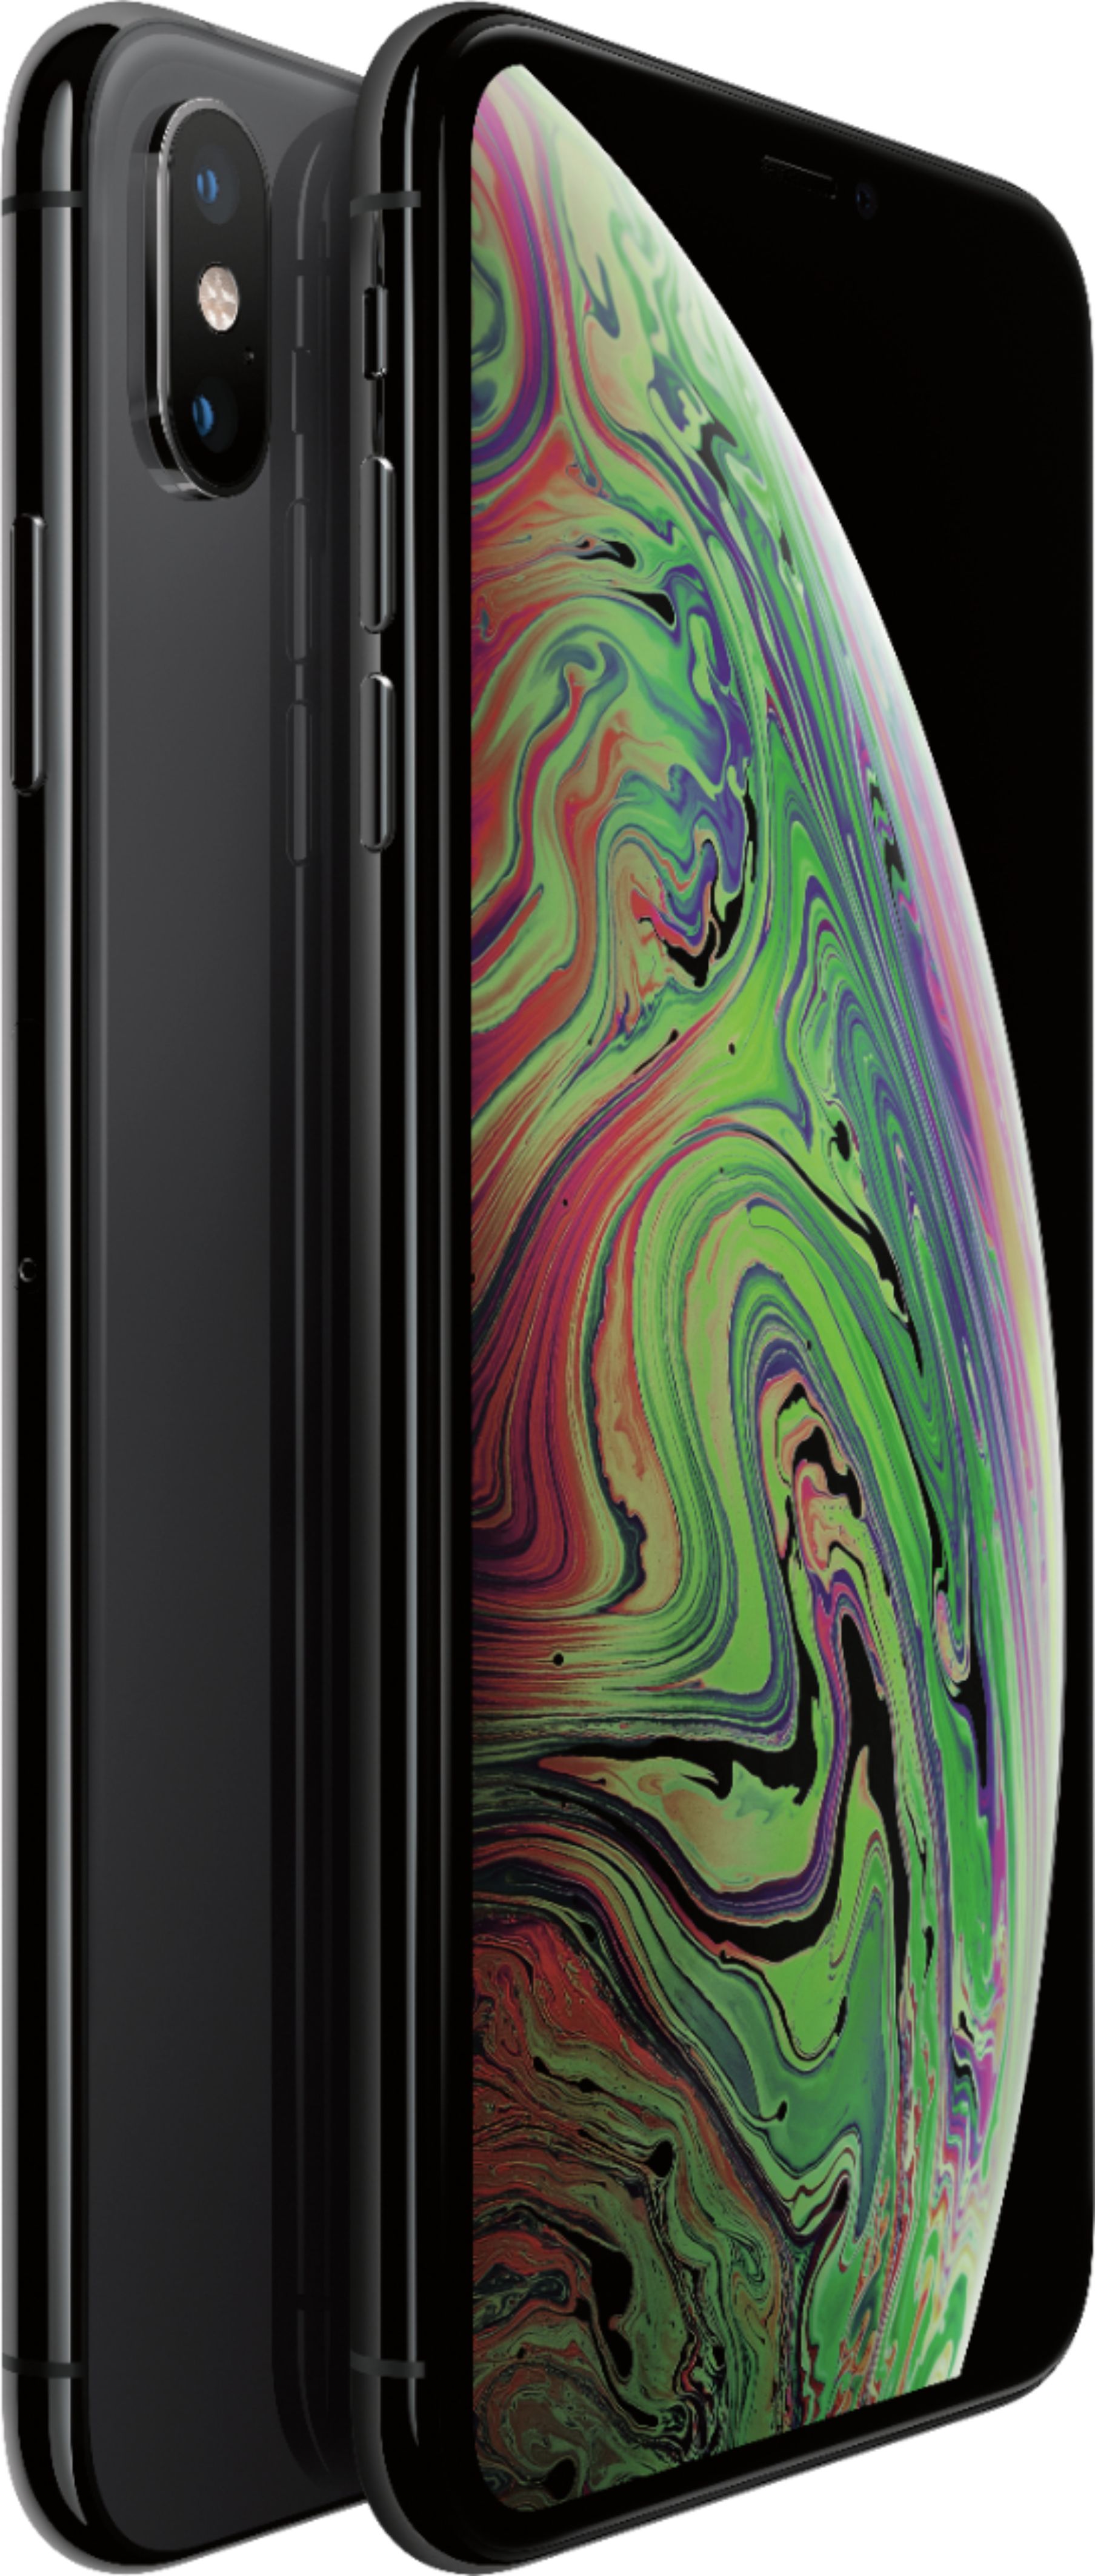 Apple Iphone Xs Max 64gb Space Gray At T Mt592ll A Best Buy